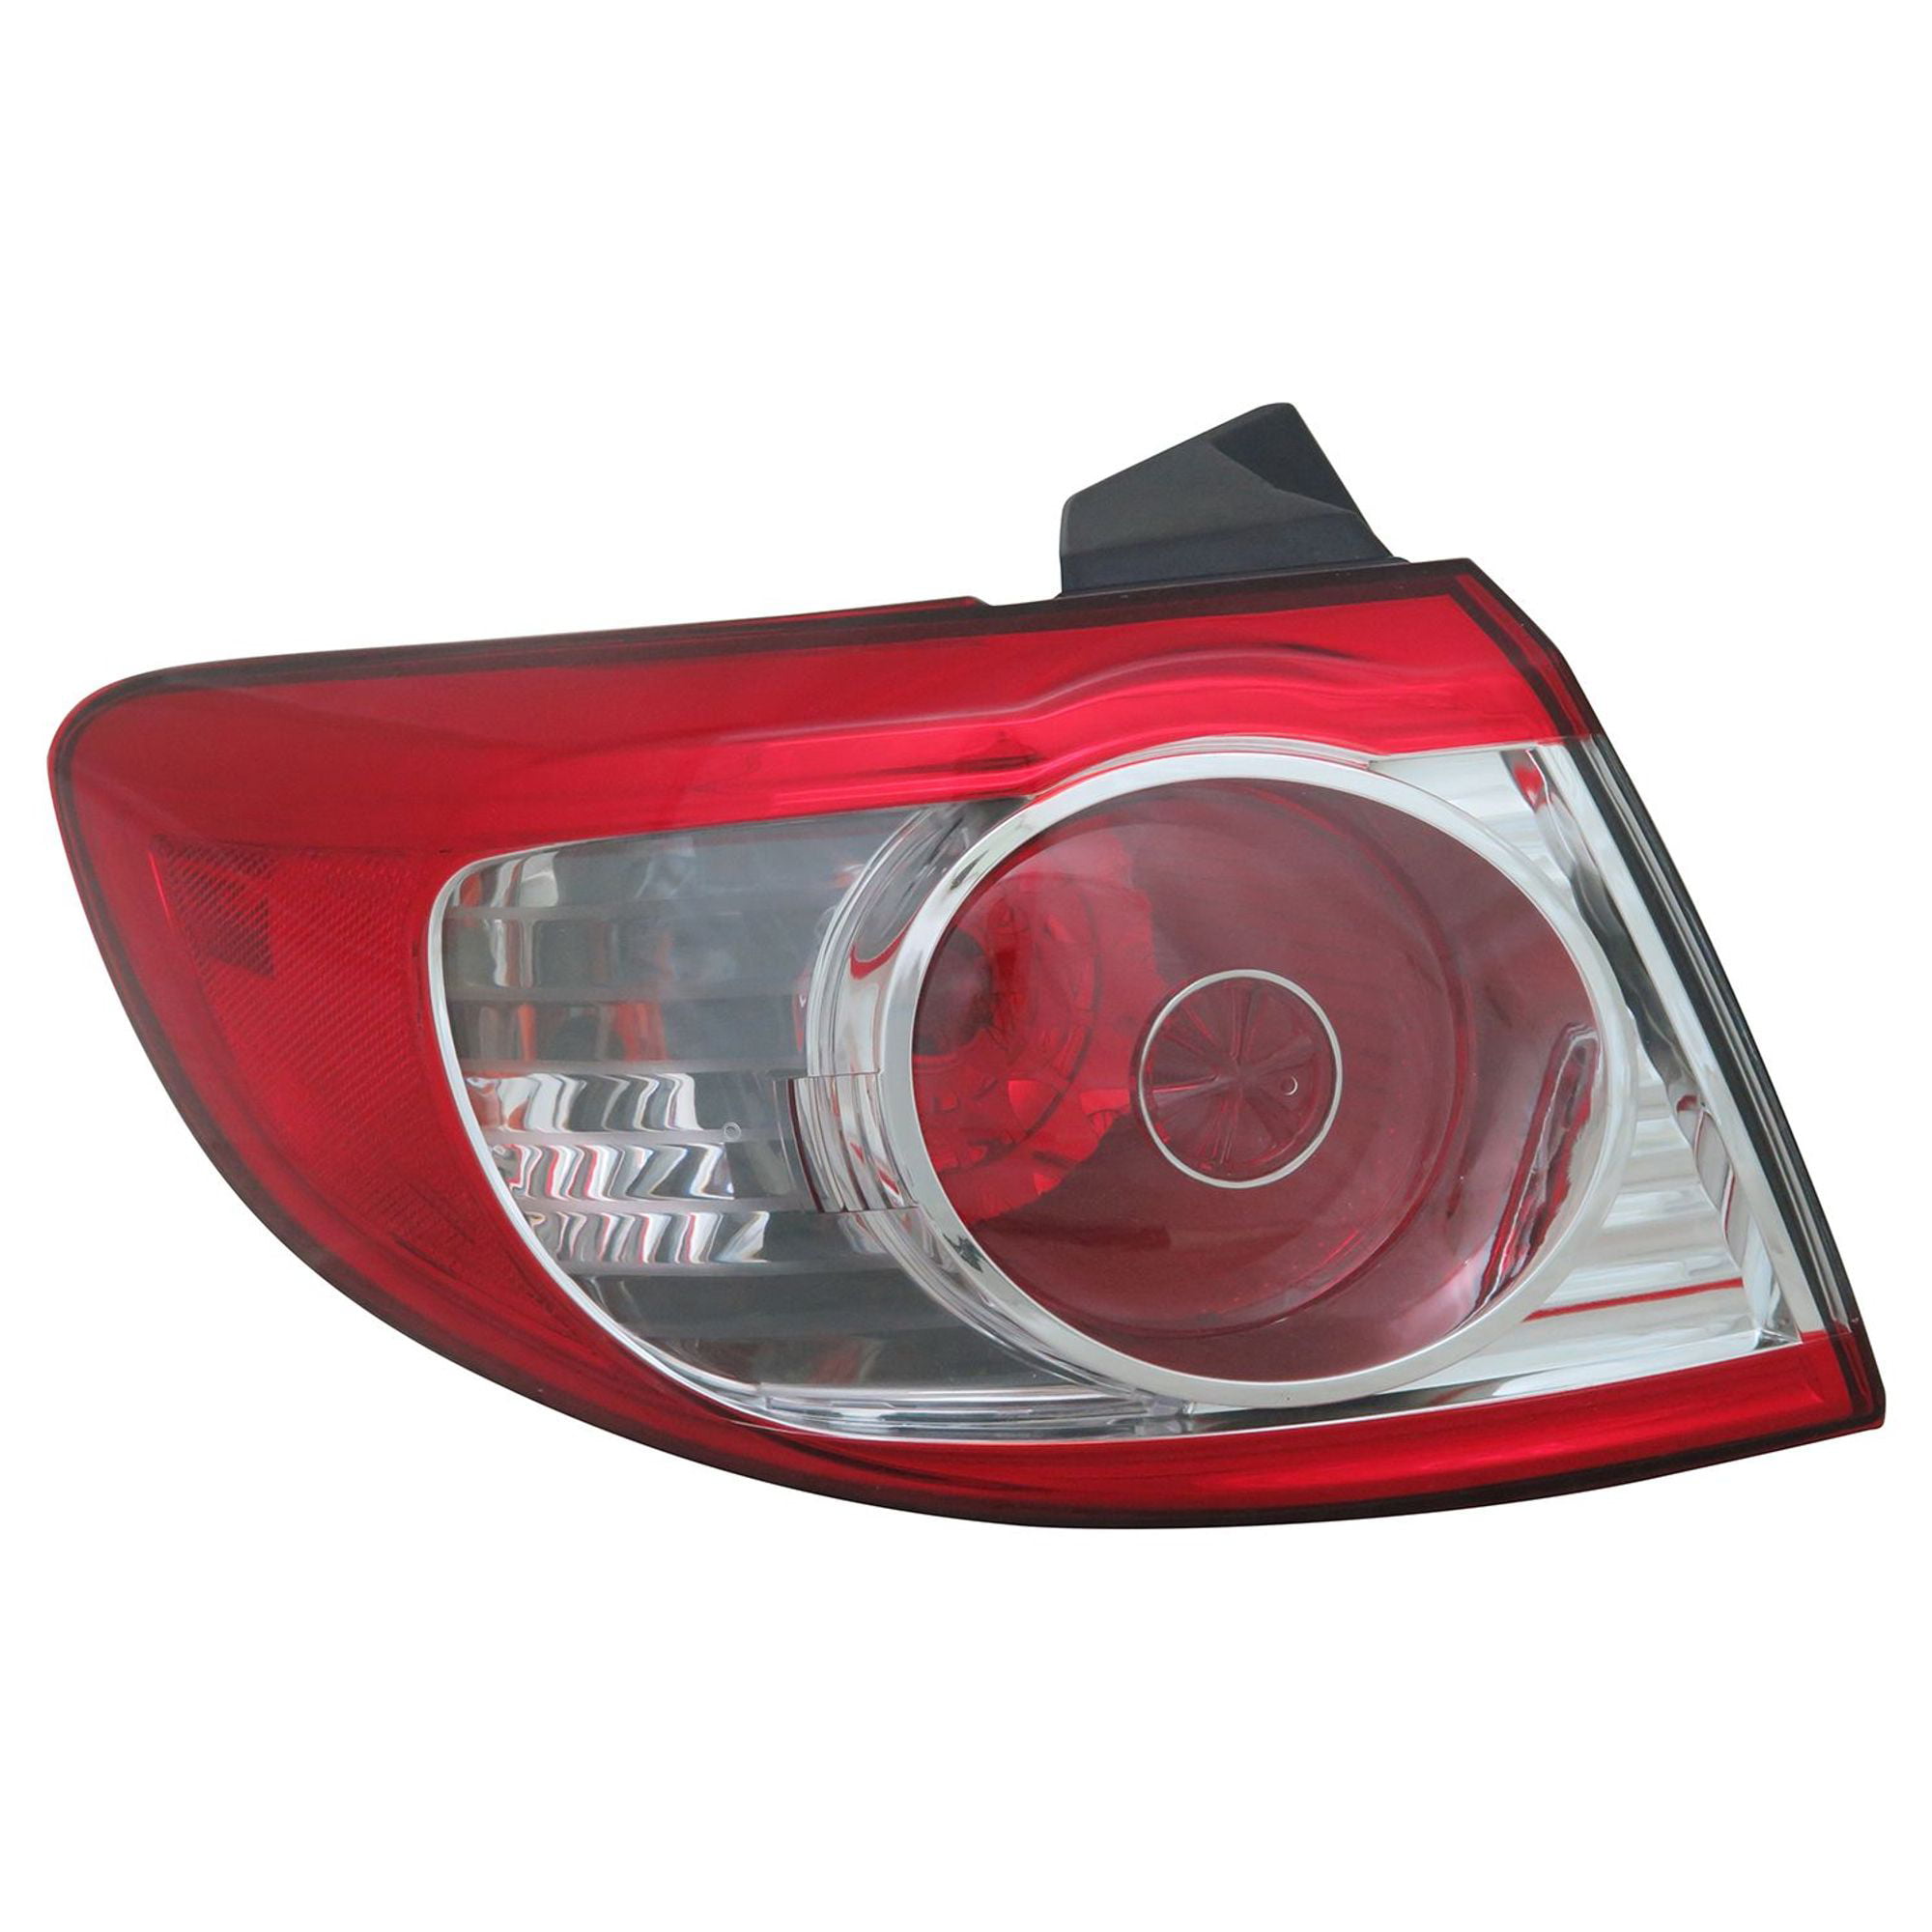 TYC 11-6318-00 Compatible with CHEVROLET Monte Carlo Driver Side Replacement Tail Light Assembly 